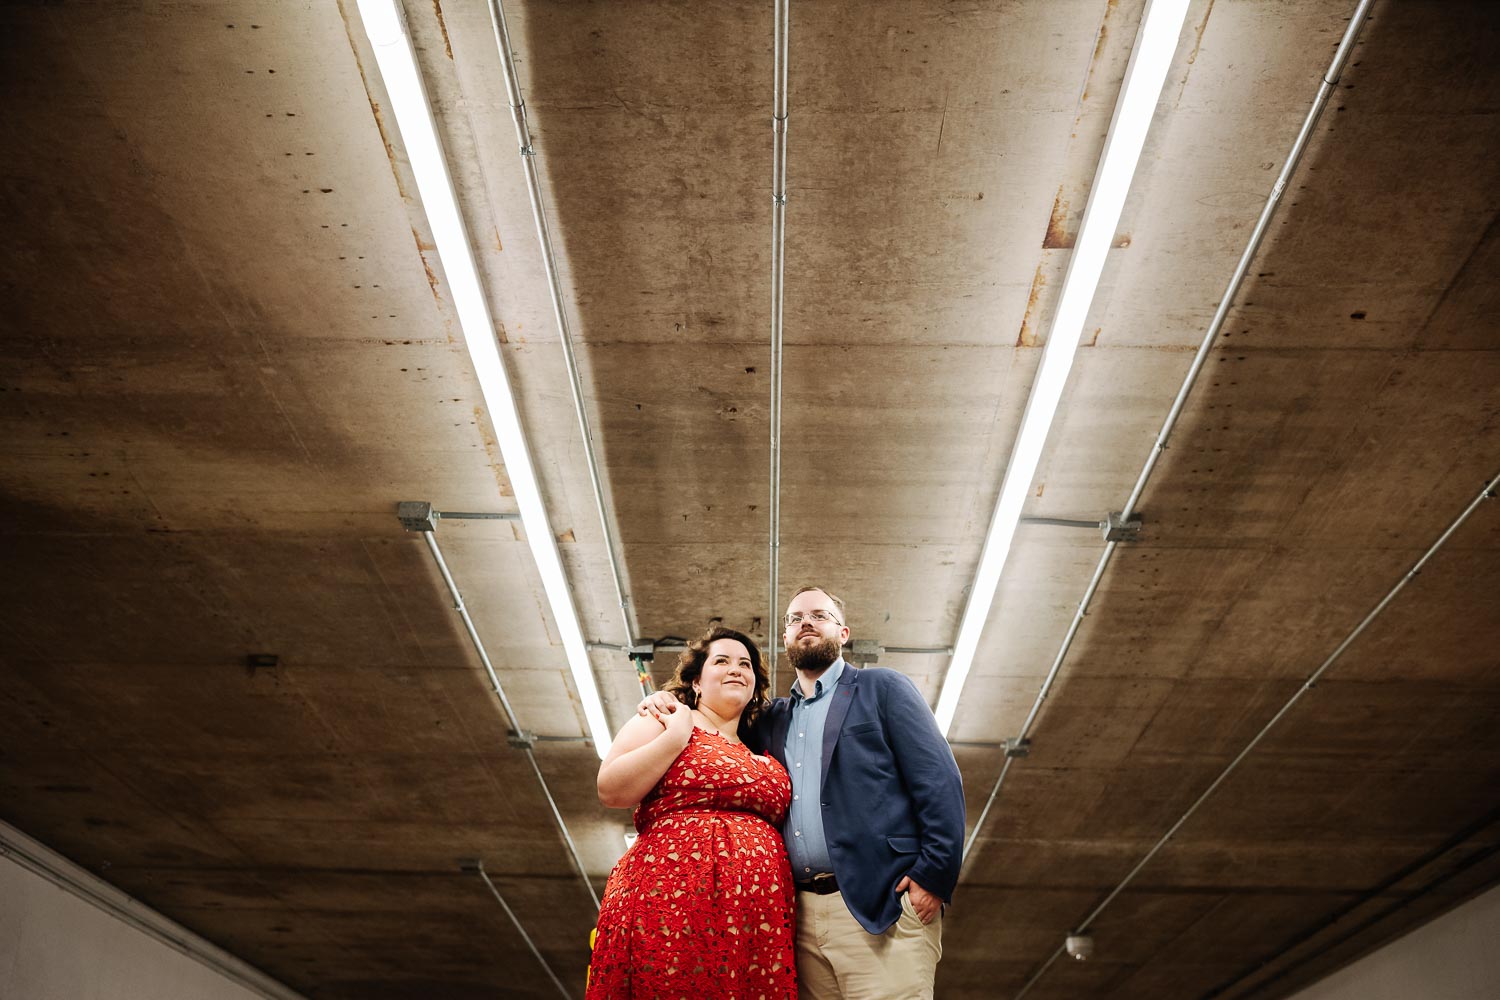 Inside Alley Theatre Center Garage Luci and Bryans engagement session downtown Theater District Houston Texas-Philip Thomas Photography